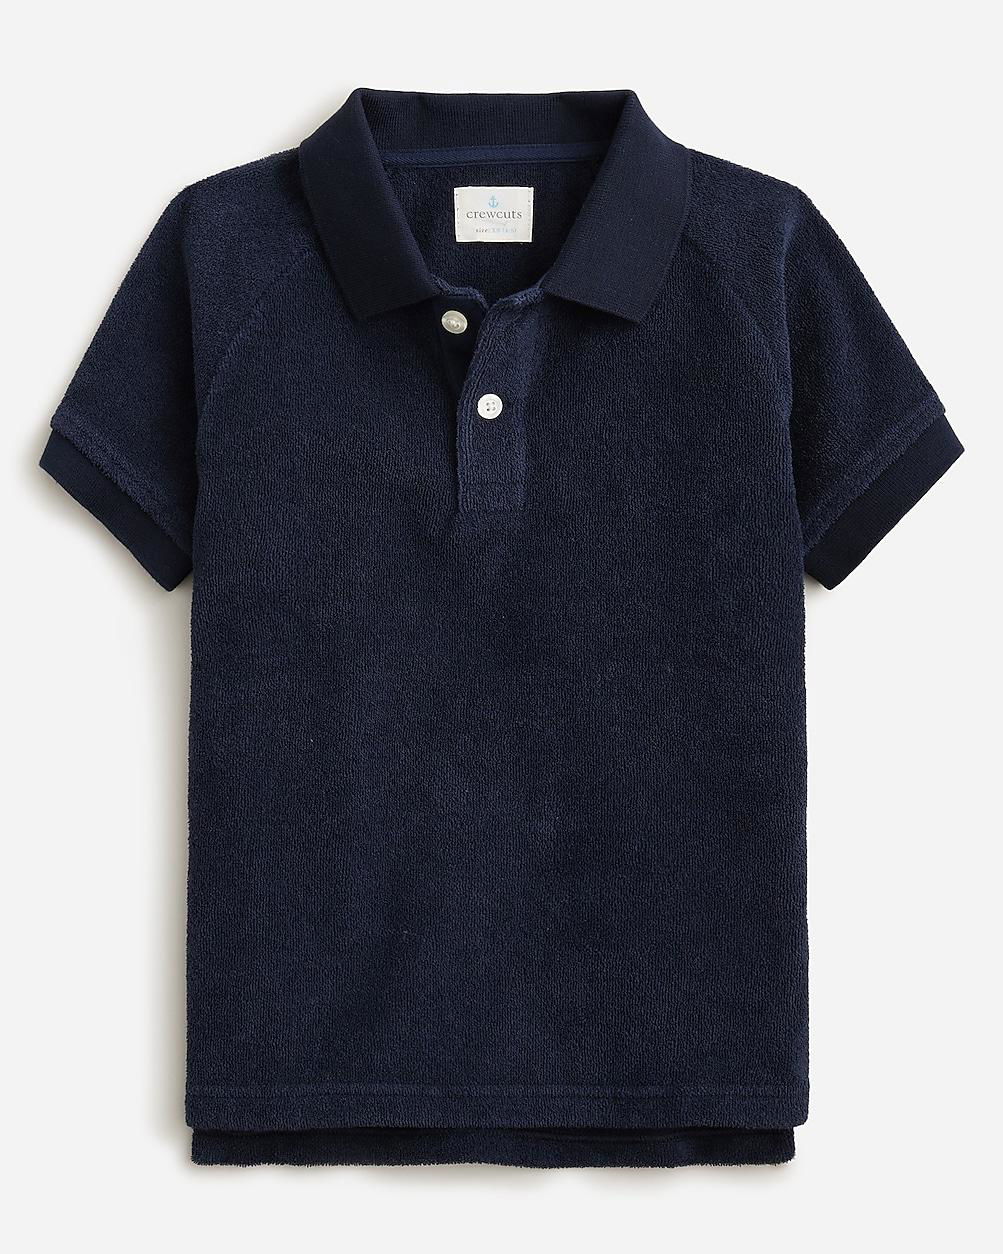 Kids' short-sleeve polo in towel terry by J.CREW